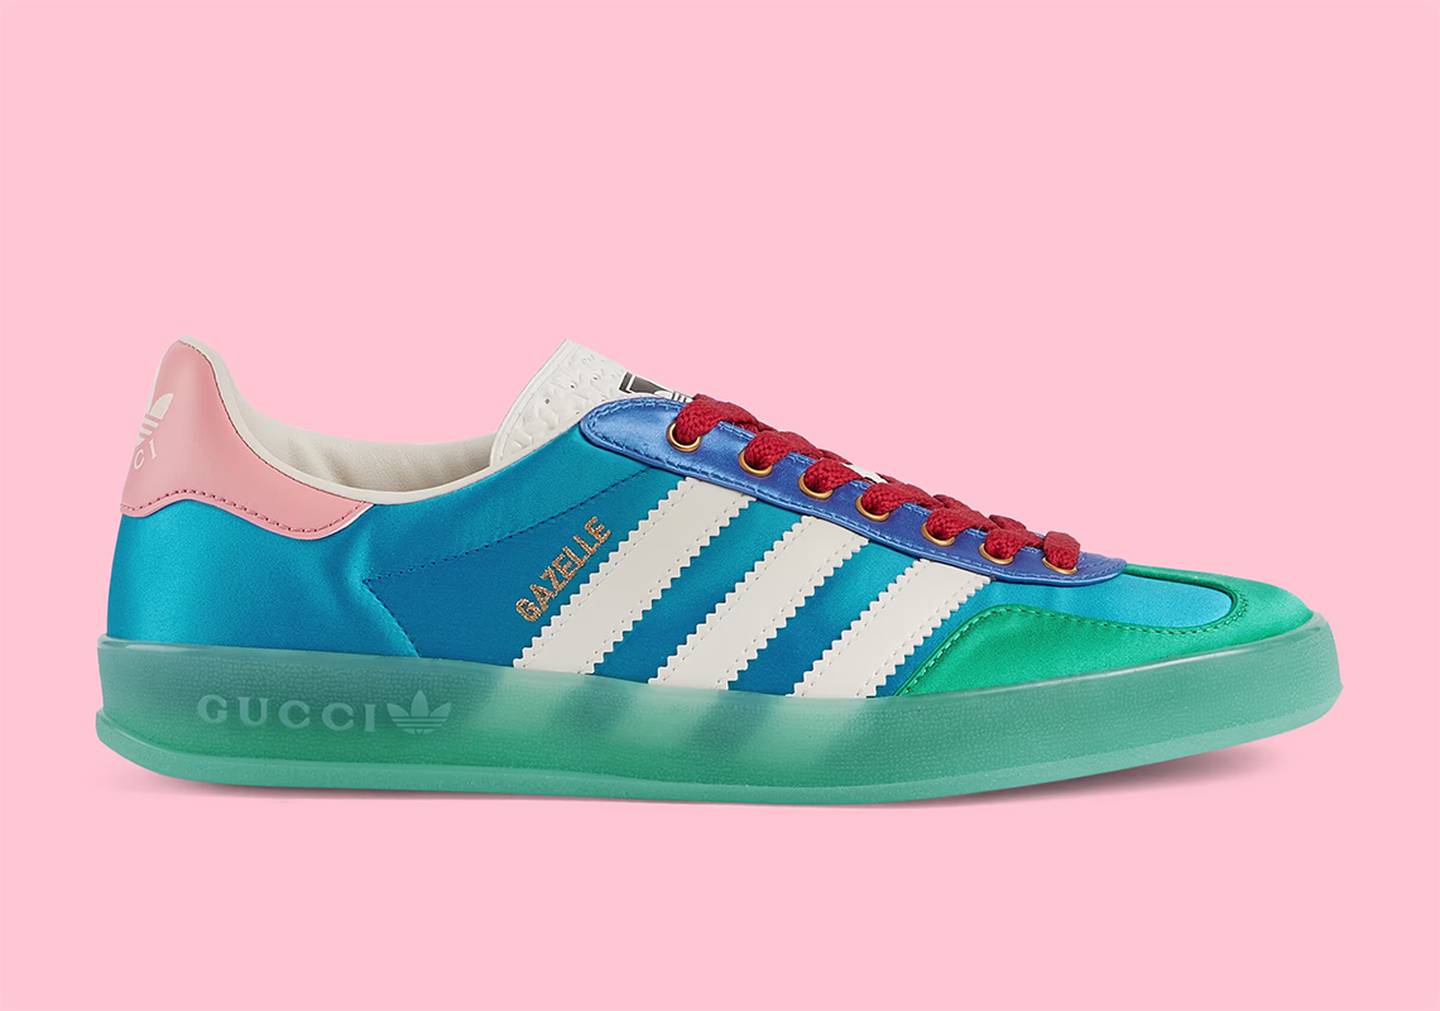 The adidas x Gucci collection has the famous Gazelle trainer in blue satin. Photo Gucci